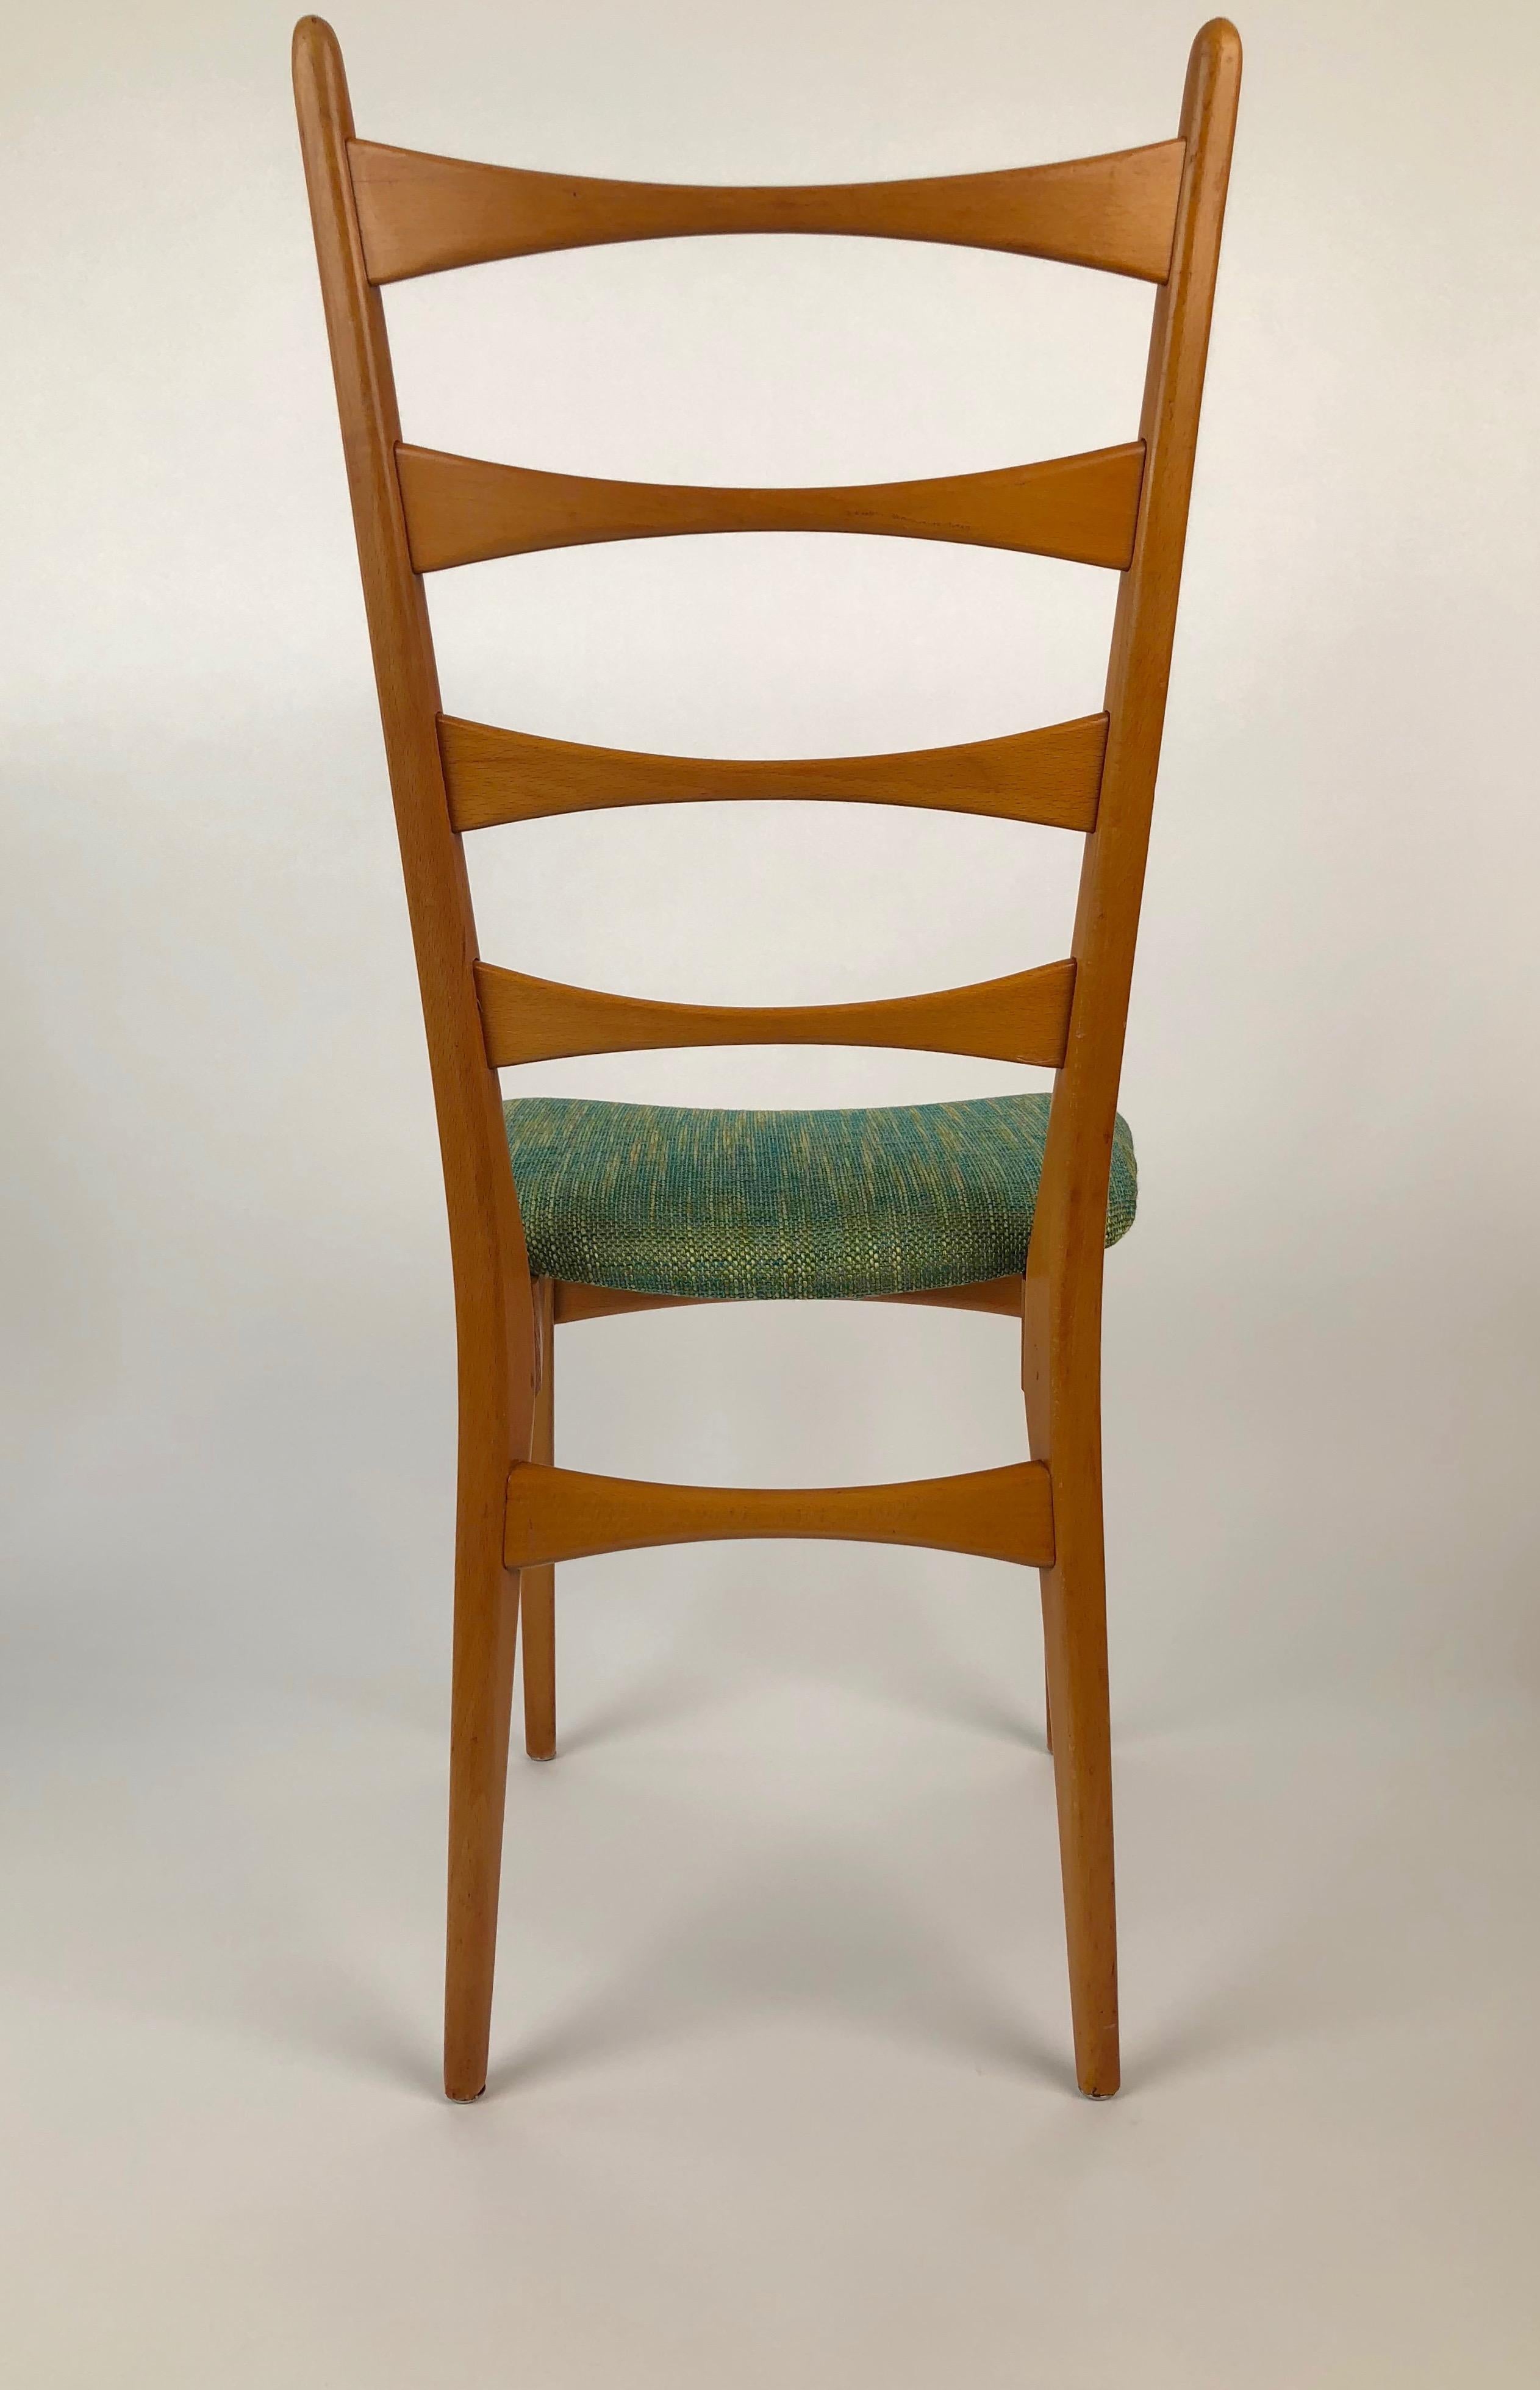 Very nice set of six Danish midcentury ladder back dining chairs from 1955, with new upholstery.
Overall, in very nice condition.